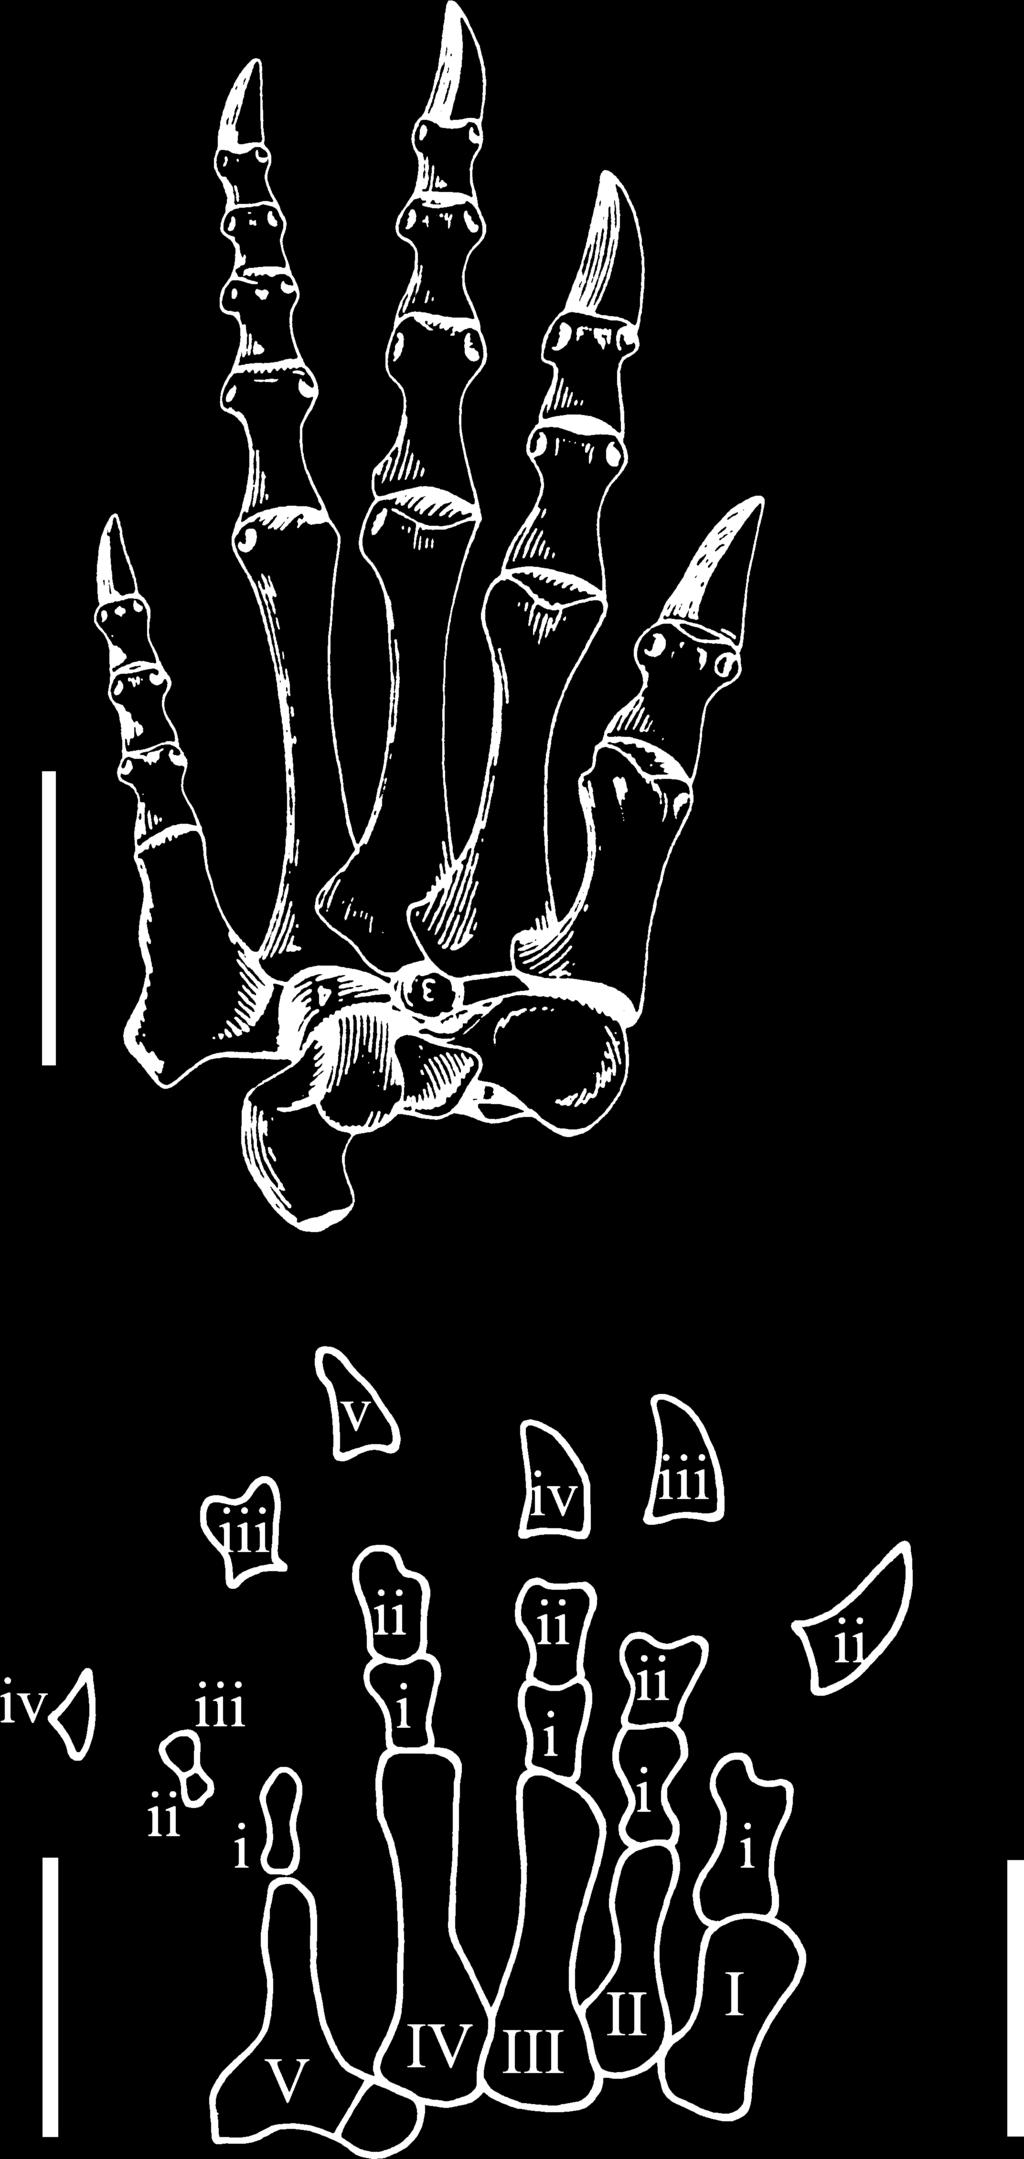 Moreover, the pedal claws are enlarged in rhynchosaurs (Benton 1983, fig. 39), which is not evident in Apatopus.